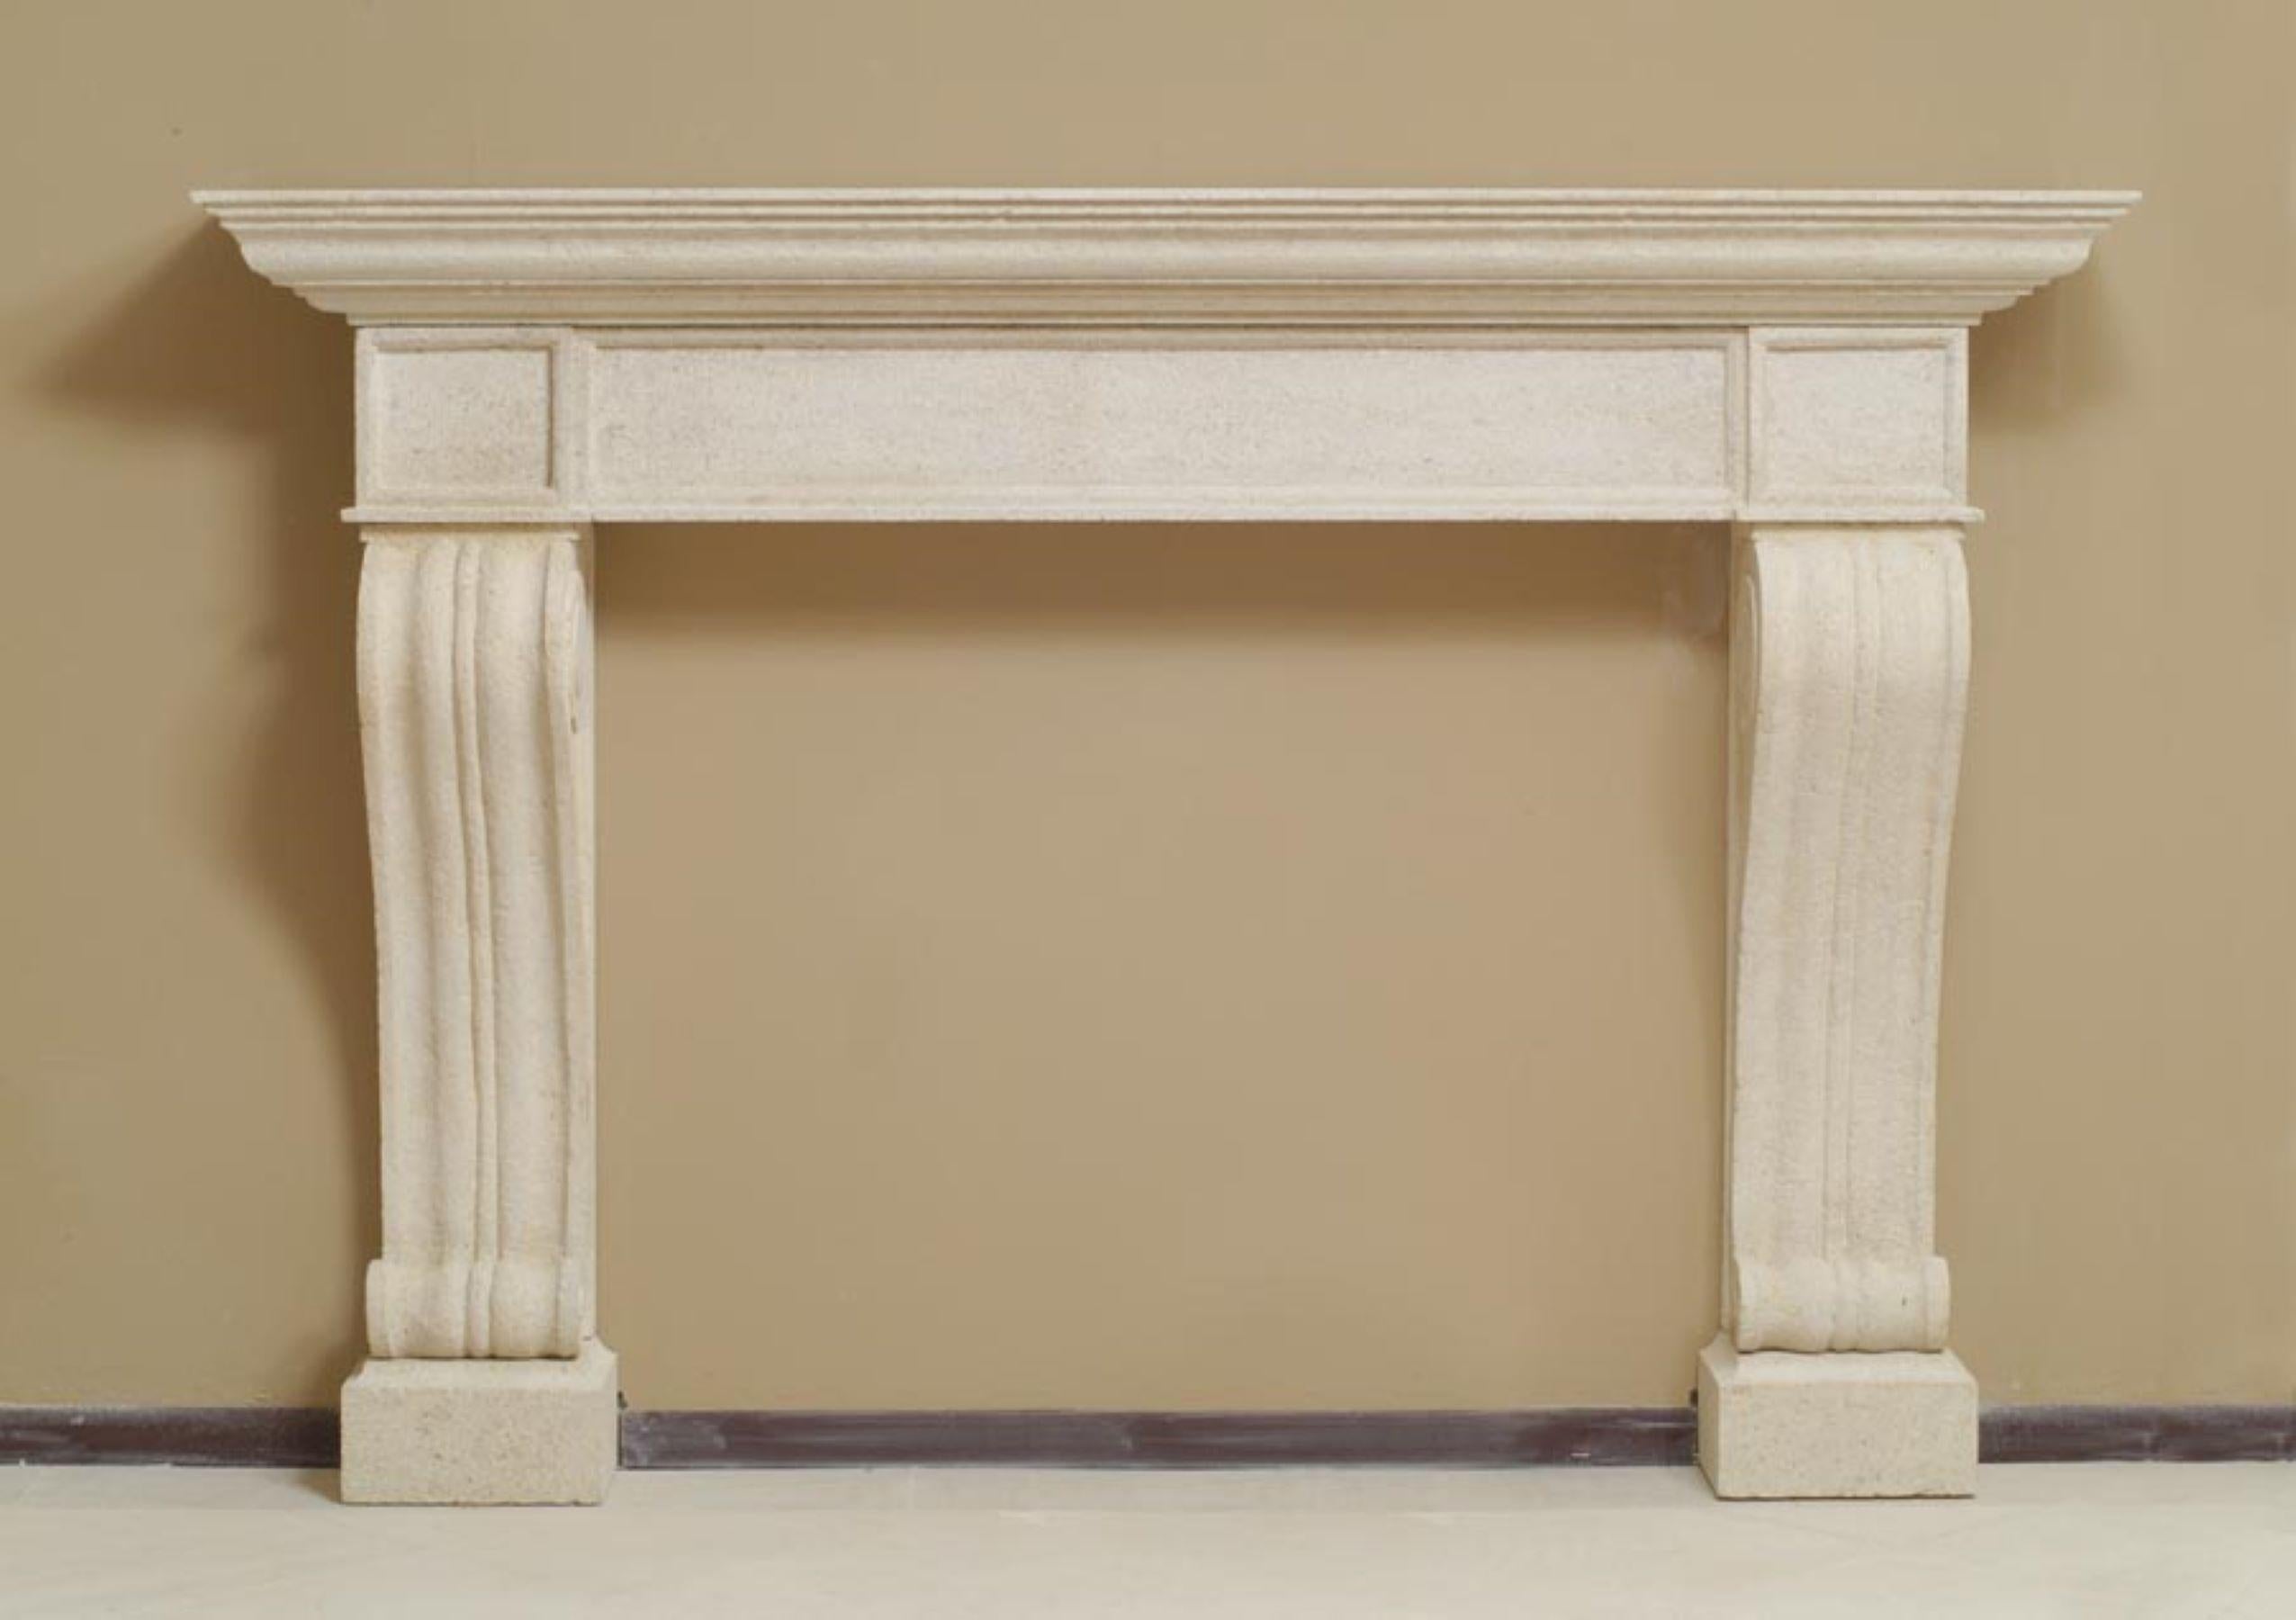 Our Florentine fireplace, named after the beautiful Italian city of Florence, the birthplace of the Renaissance, is inspired by design from that era. The legs feature a deep scrolling top, and a smaller scroll at the bottom, above chamfered square